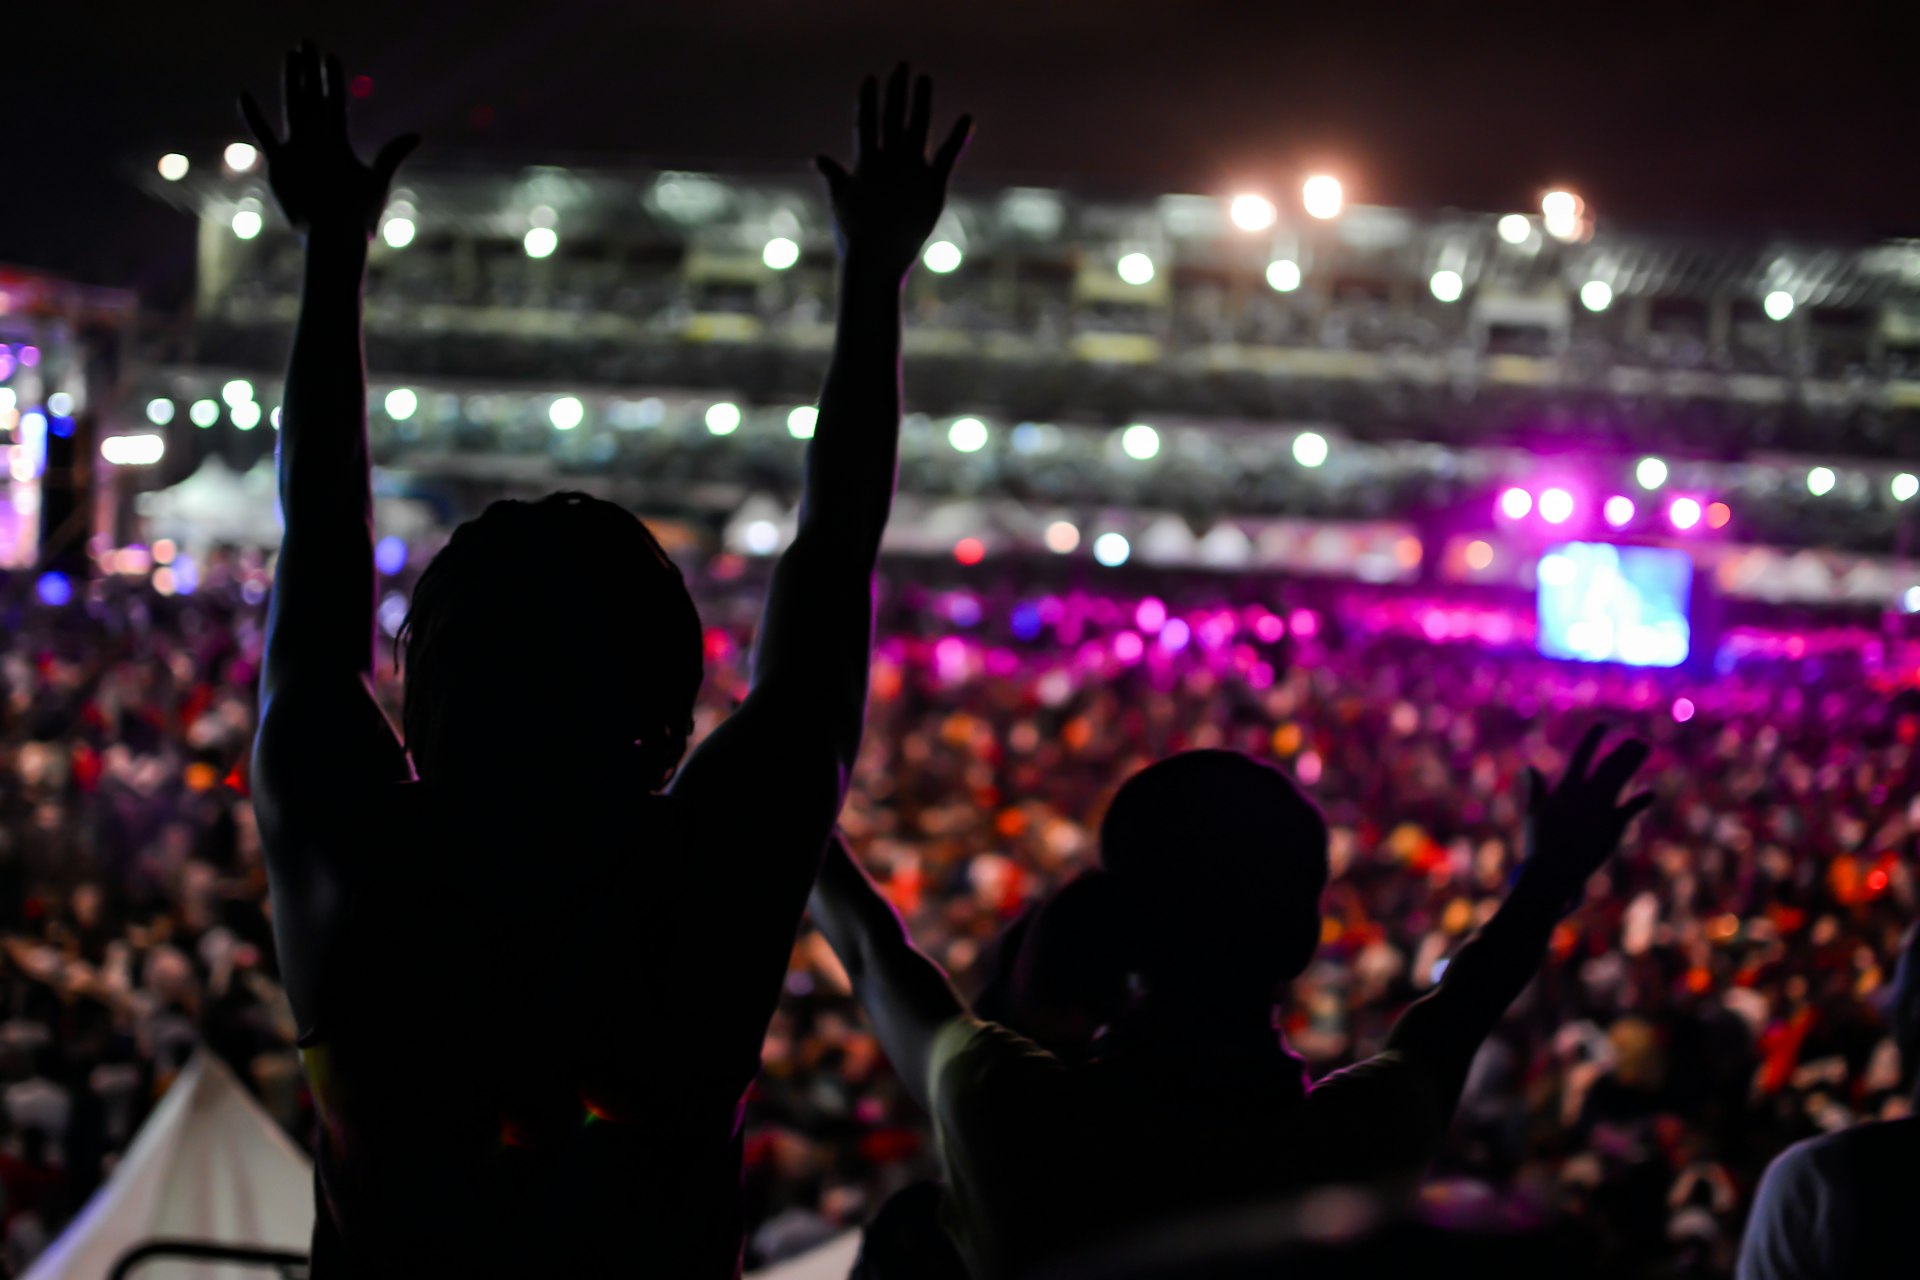 People in silhouette with their hands in the air at a concert arena